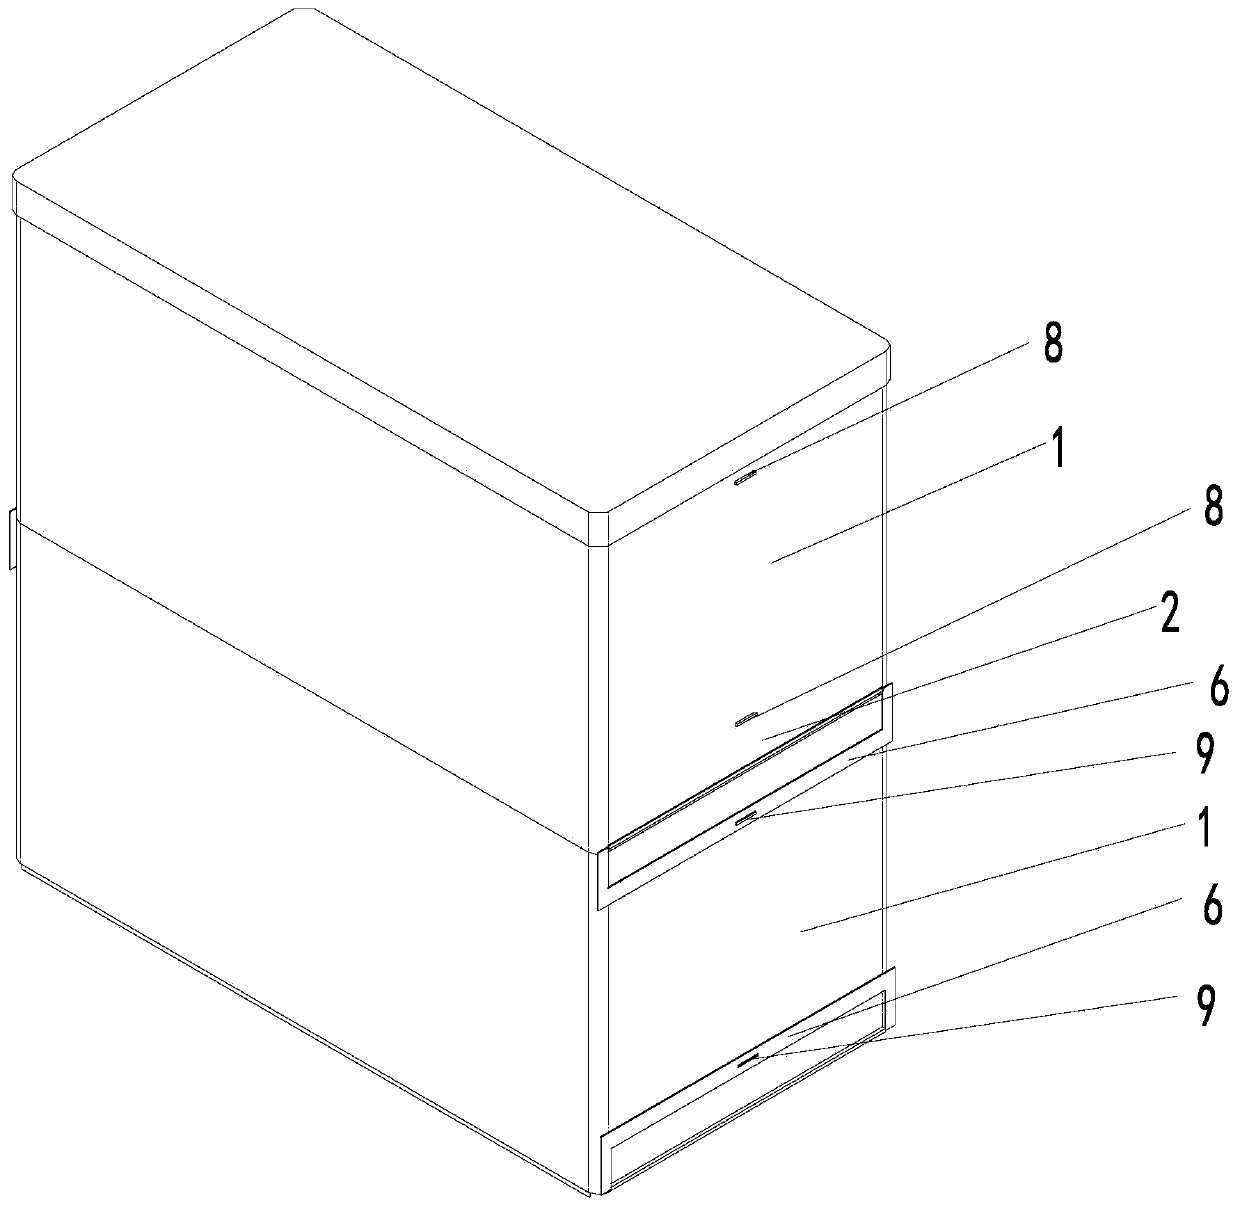 Storage box with high space utilization rate and refrigerator